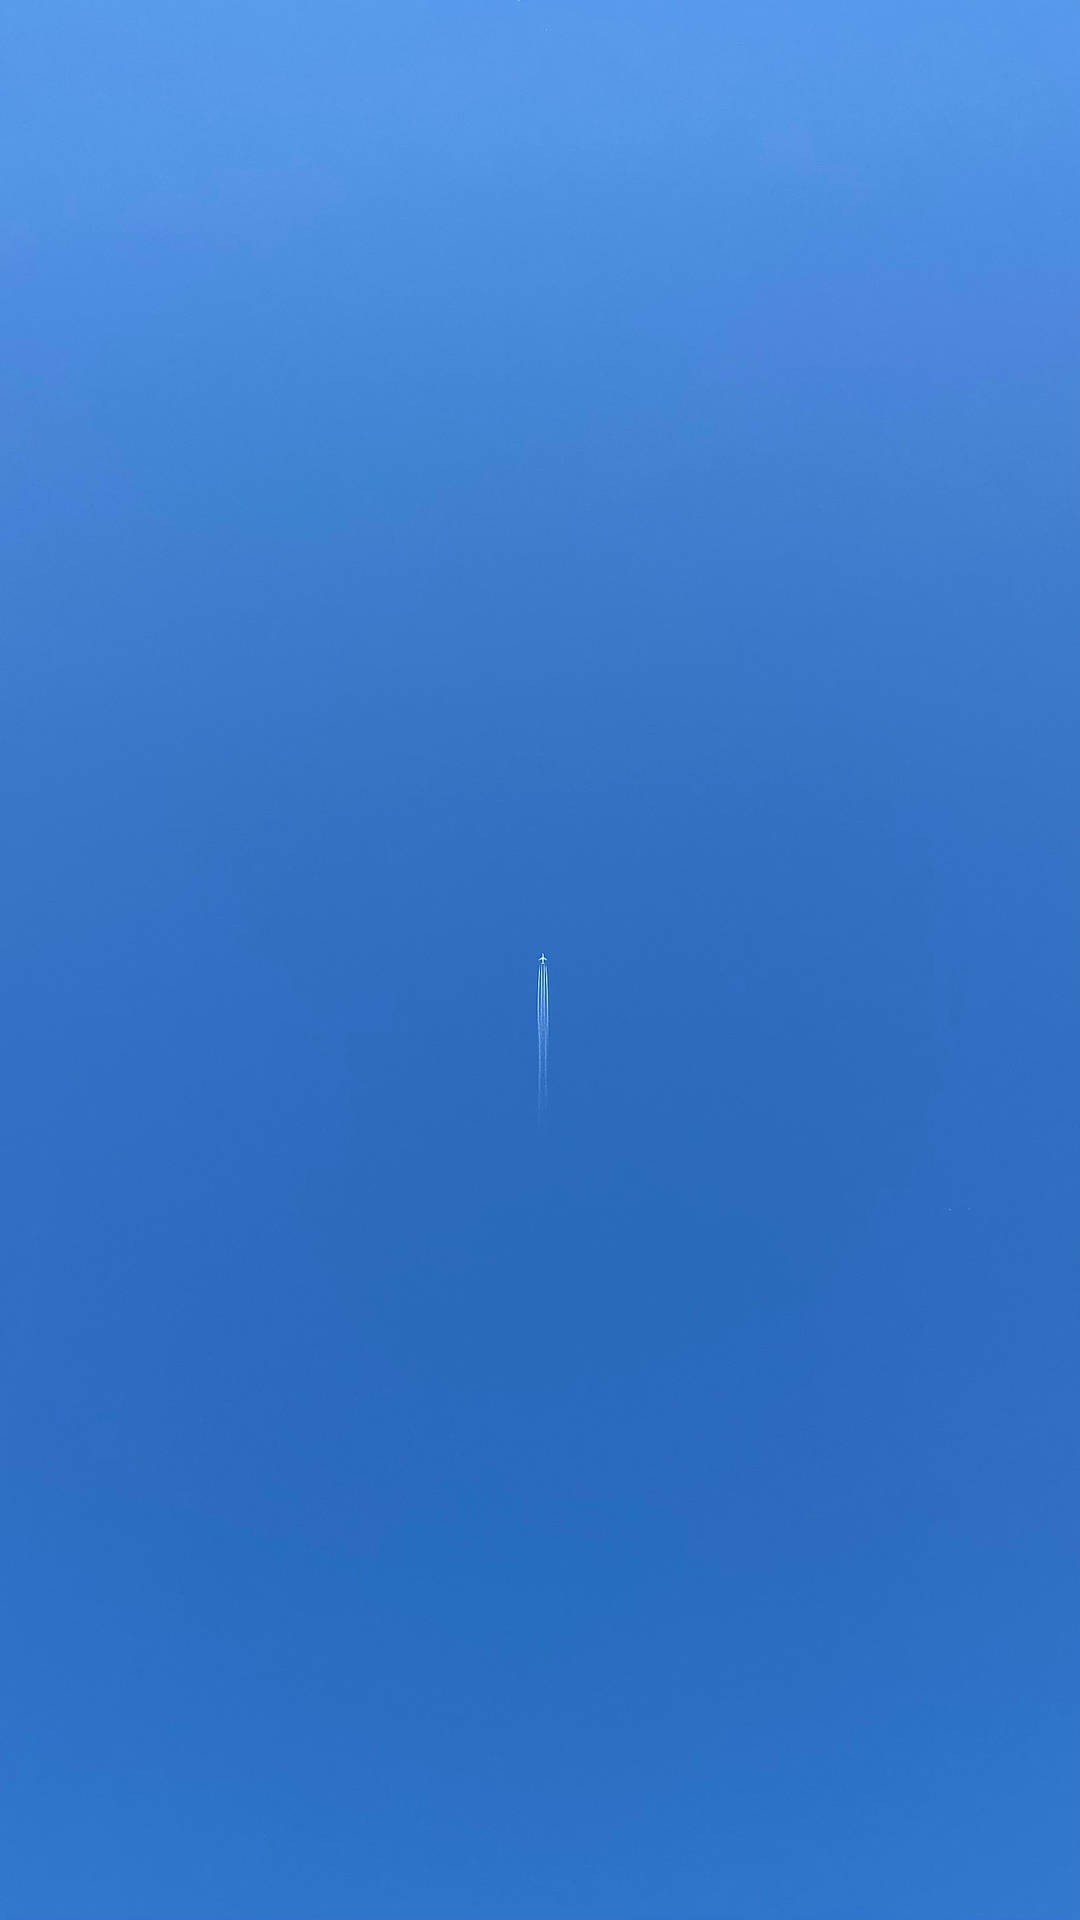 A Small Plane Trails a Ribbon of Cloudy Vapor in the Sky Wallpaper